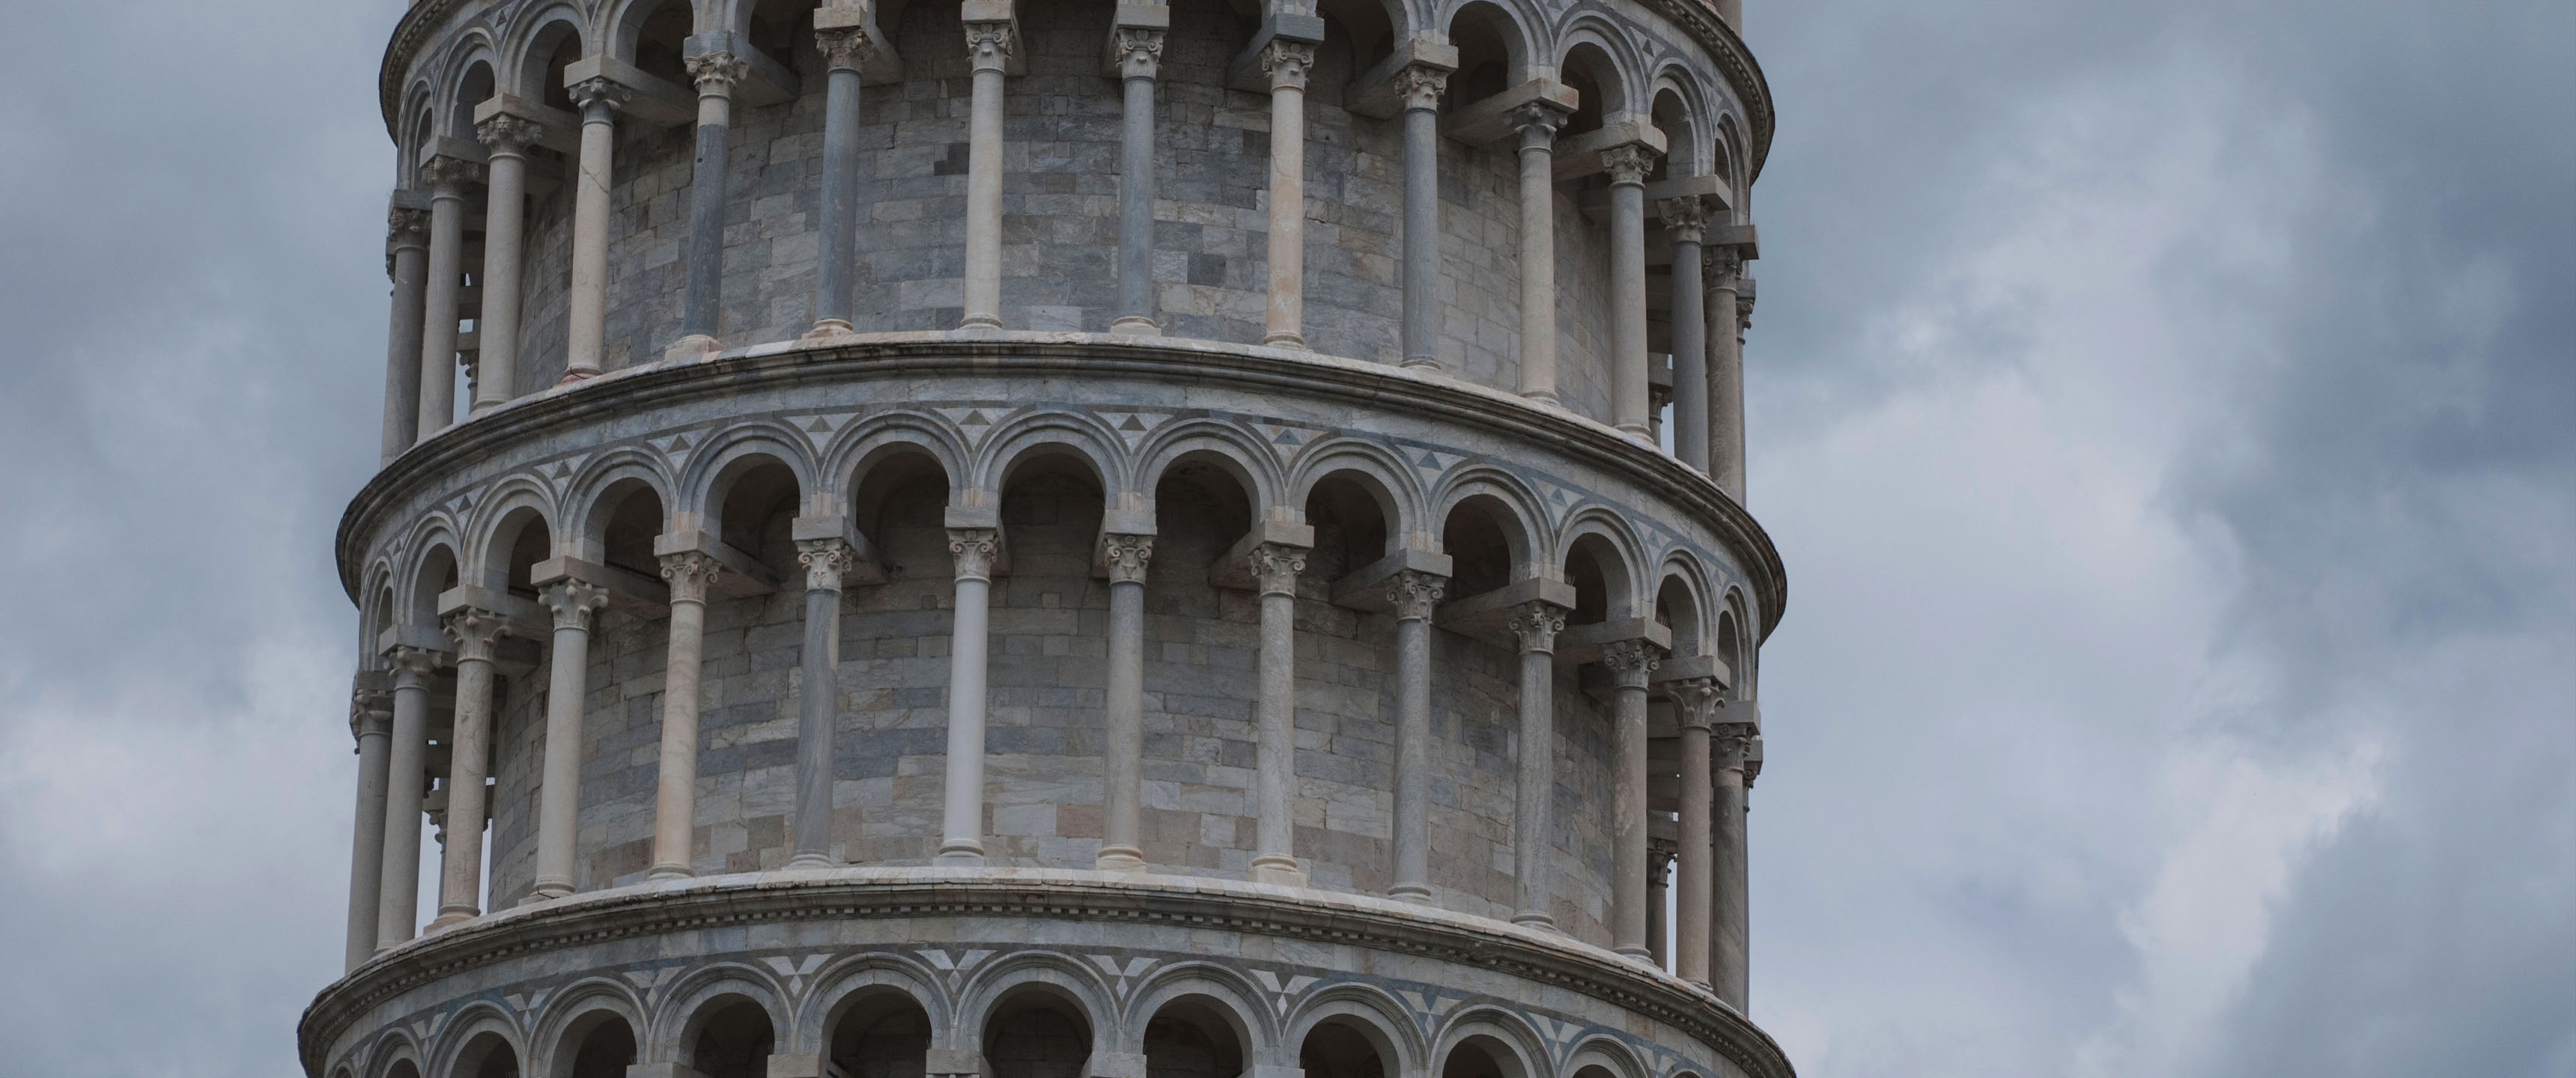 General 3440x1440 Leaning Tower of Pisa architecture Italy building Europe landmark World Heritage Site